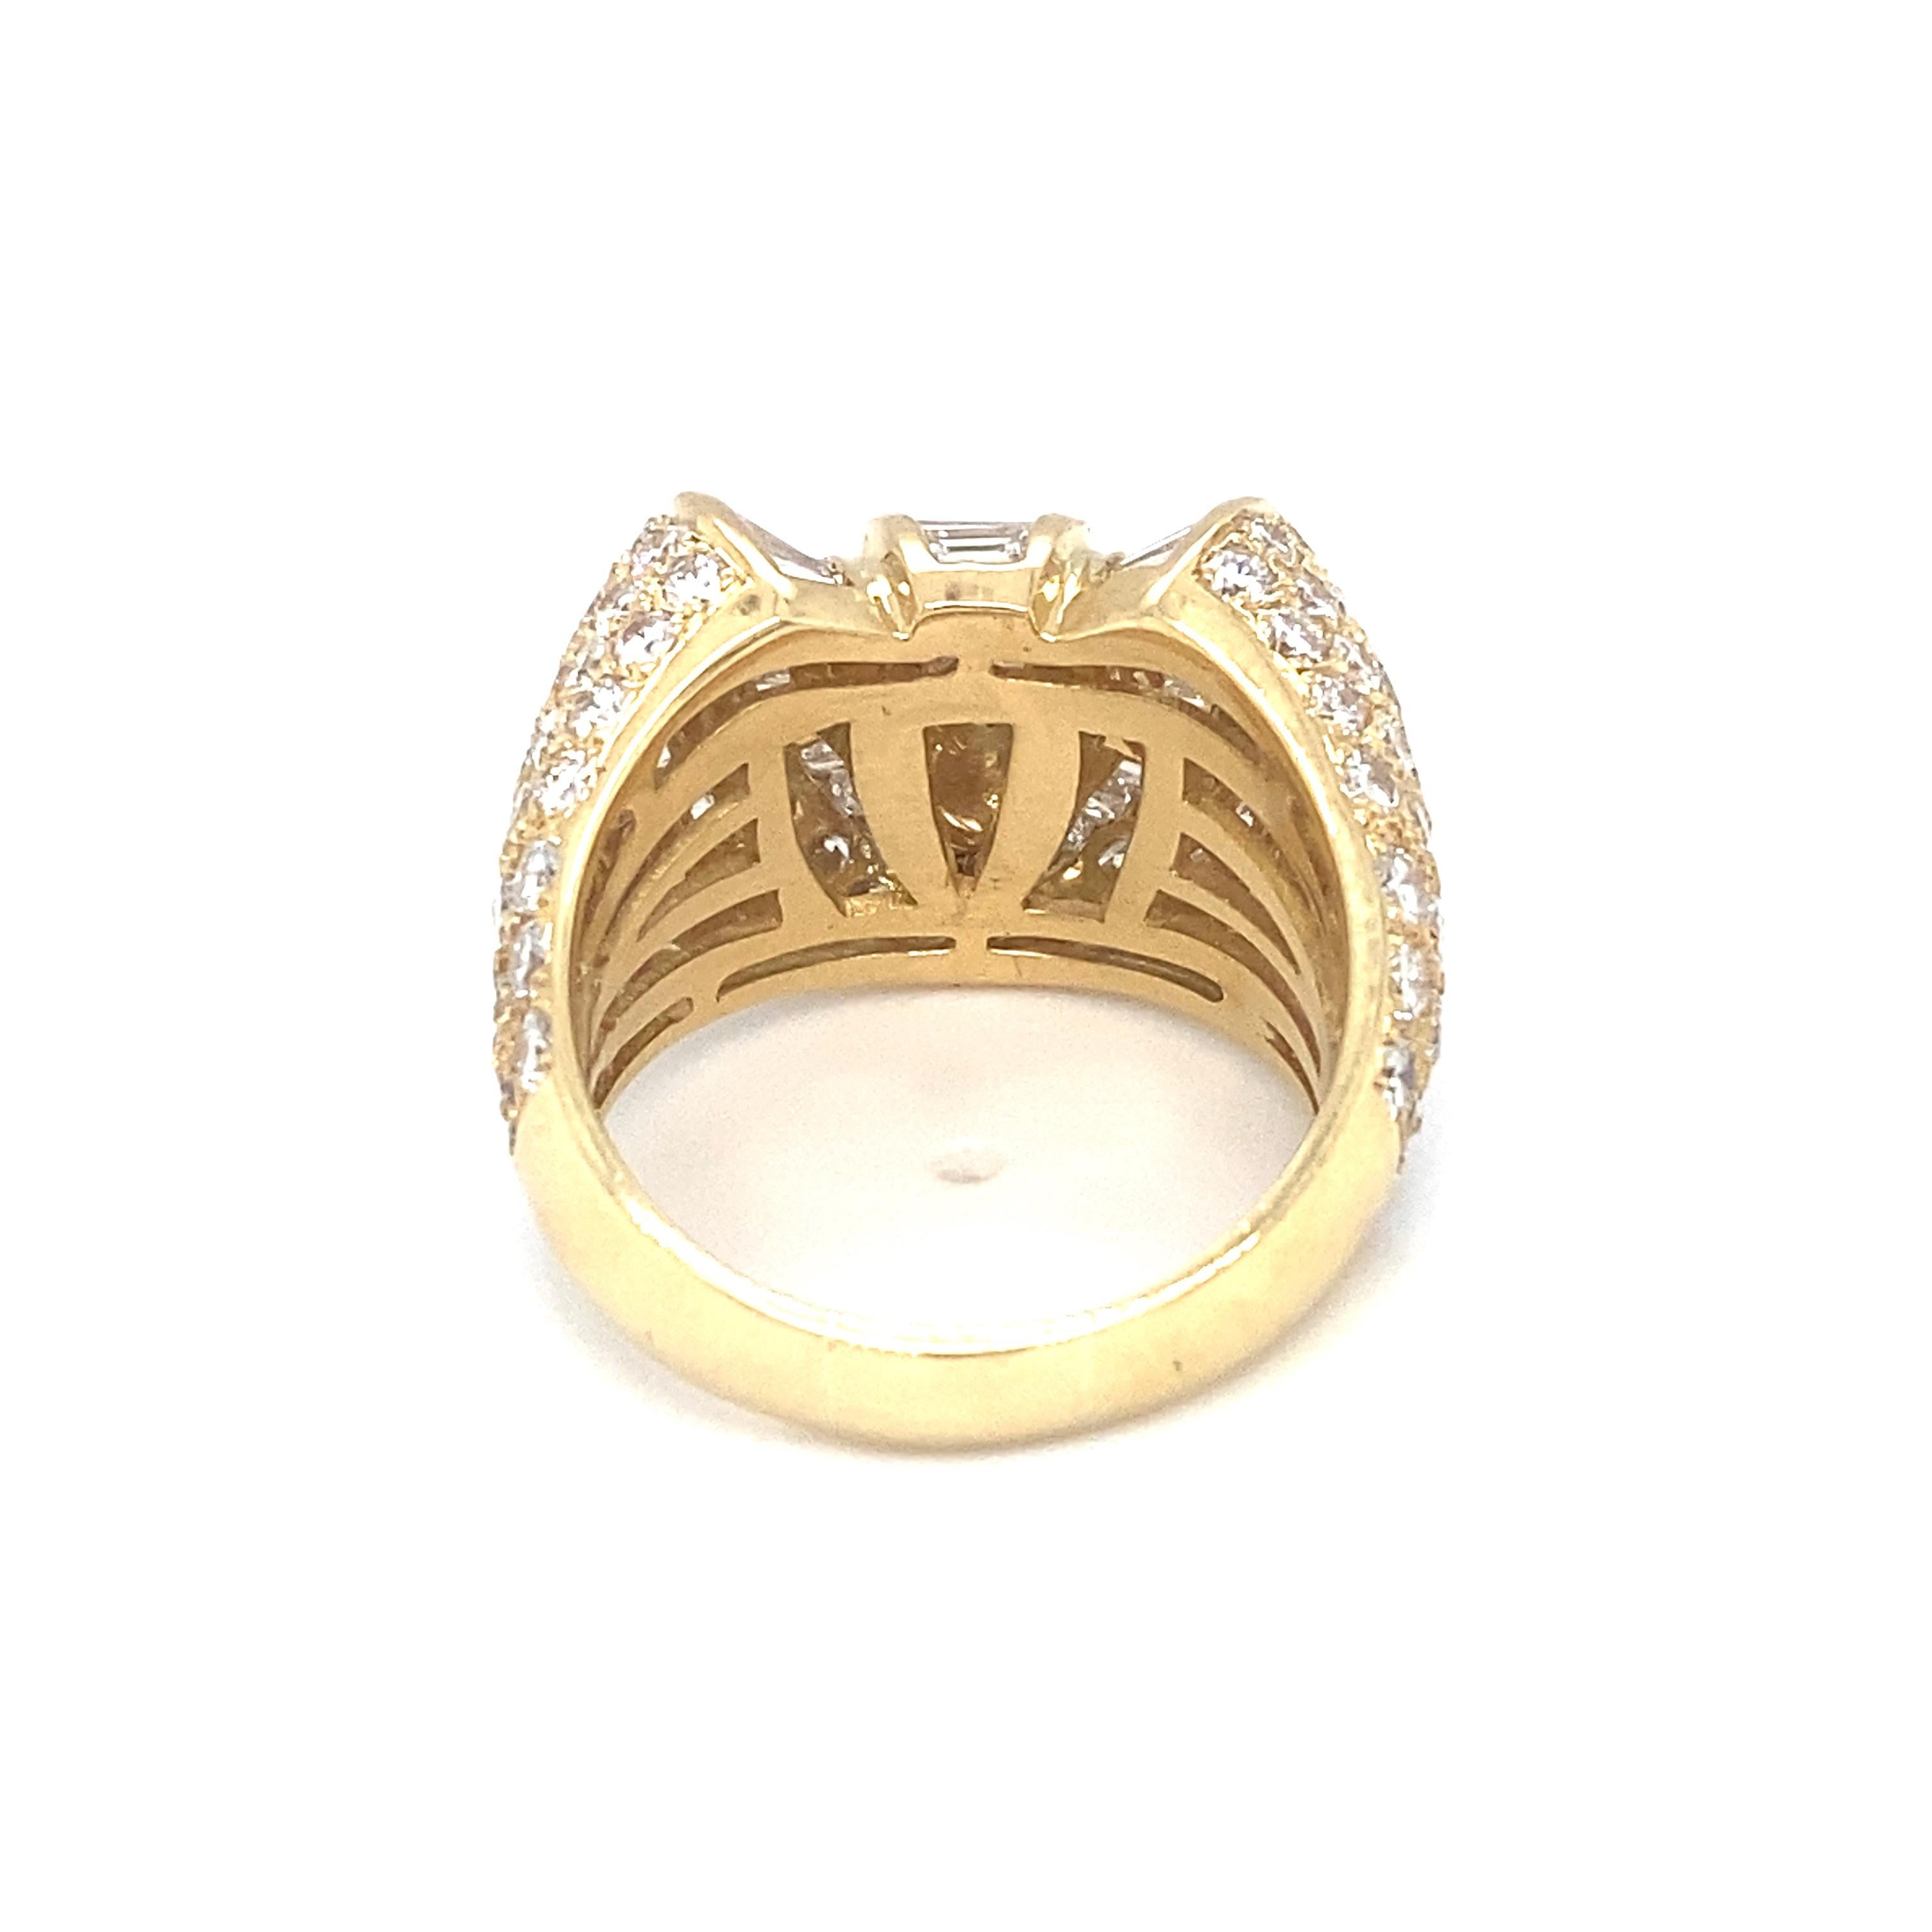 Item Details: This large ring features baguette and round diamonds and is an excellent statement piece!

Circa: 1980s
Metal Type: 18k yellow gold
Weight: 16.3g
Size: US 9, resizable

Diamond Details:

Carat: 7.0 carat total weight
Shape: Round and